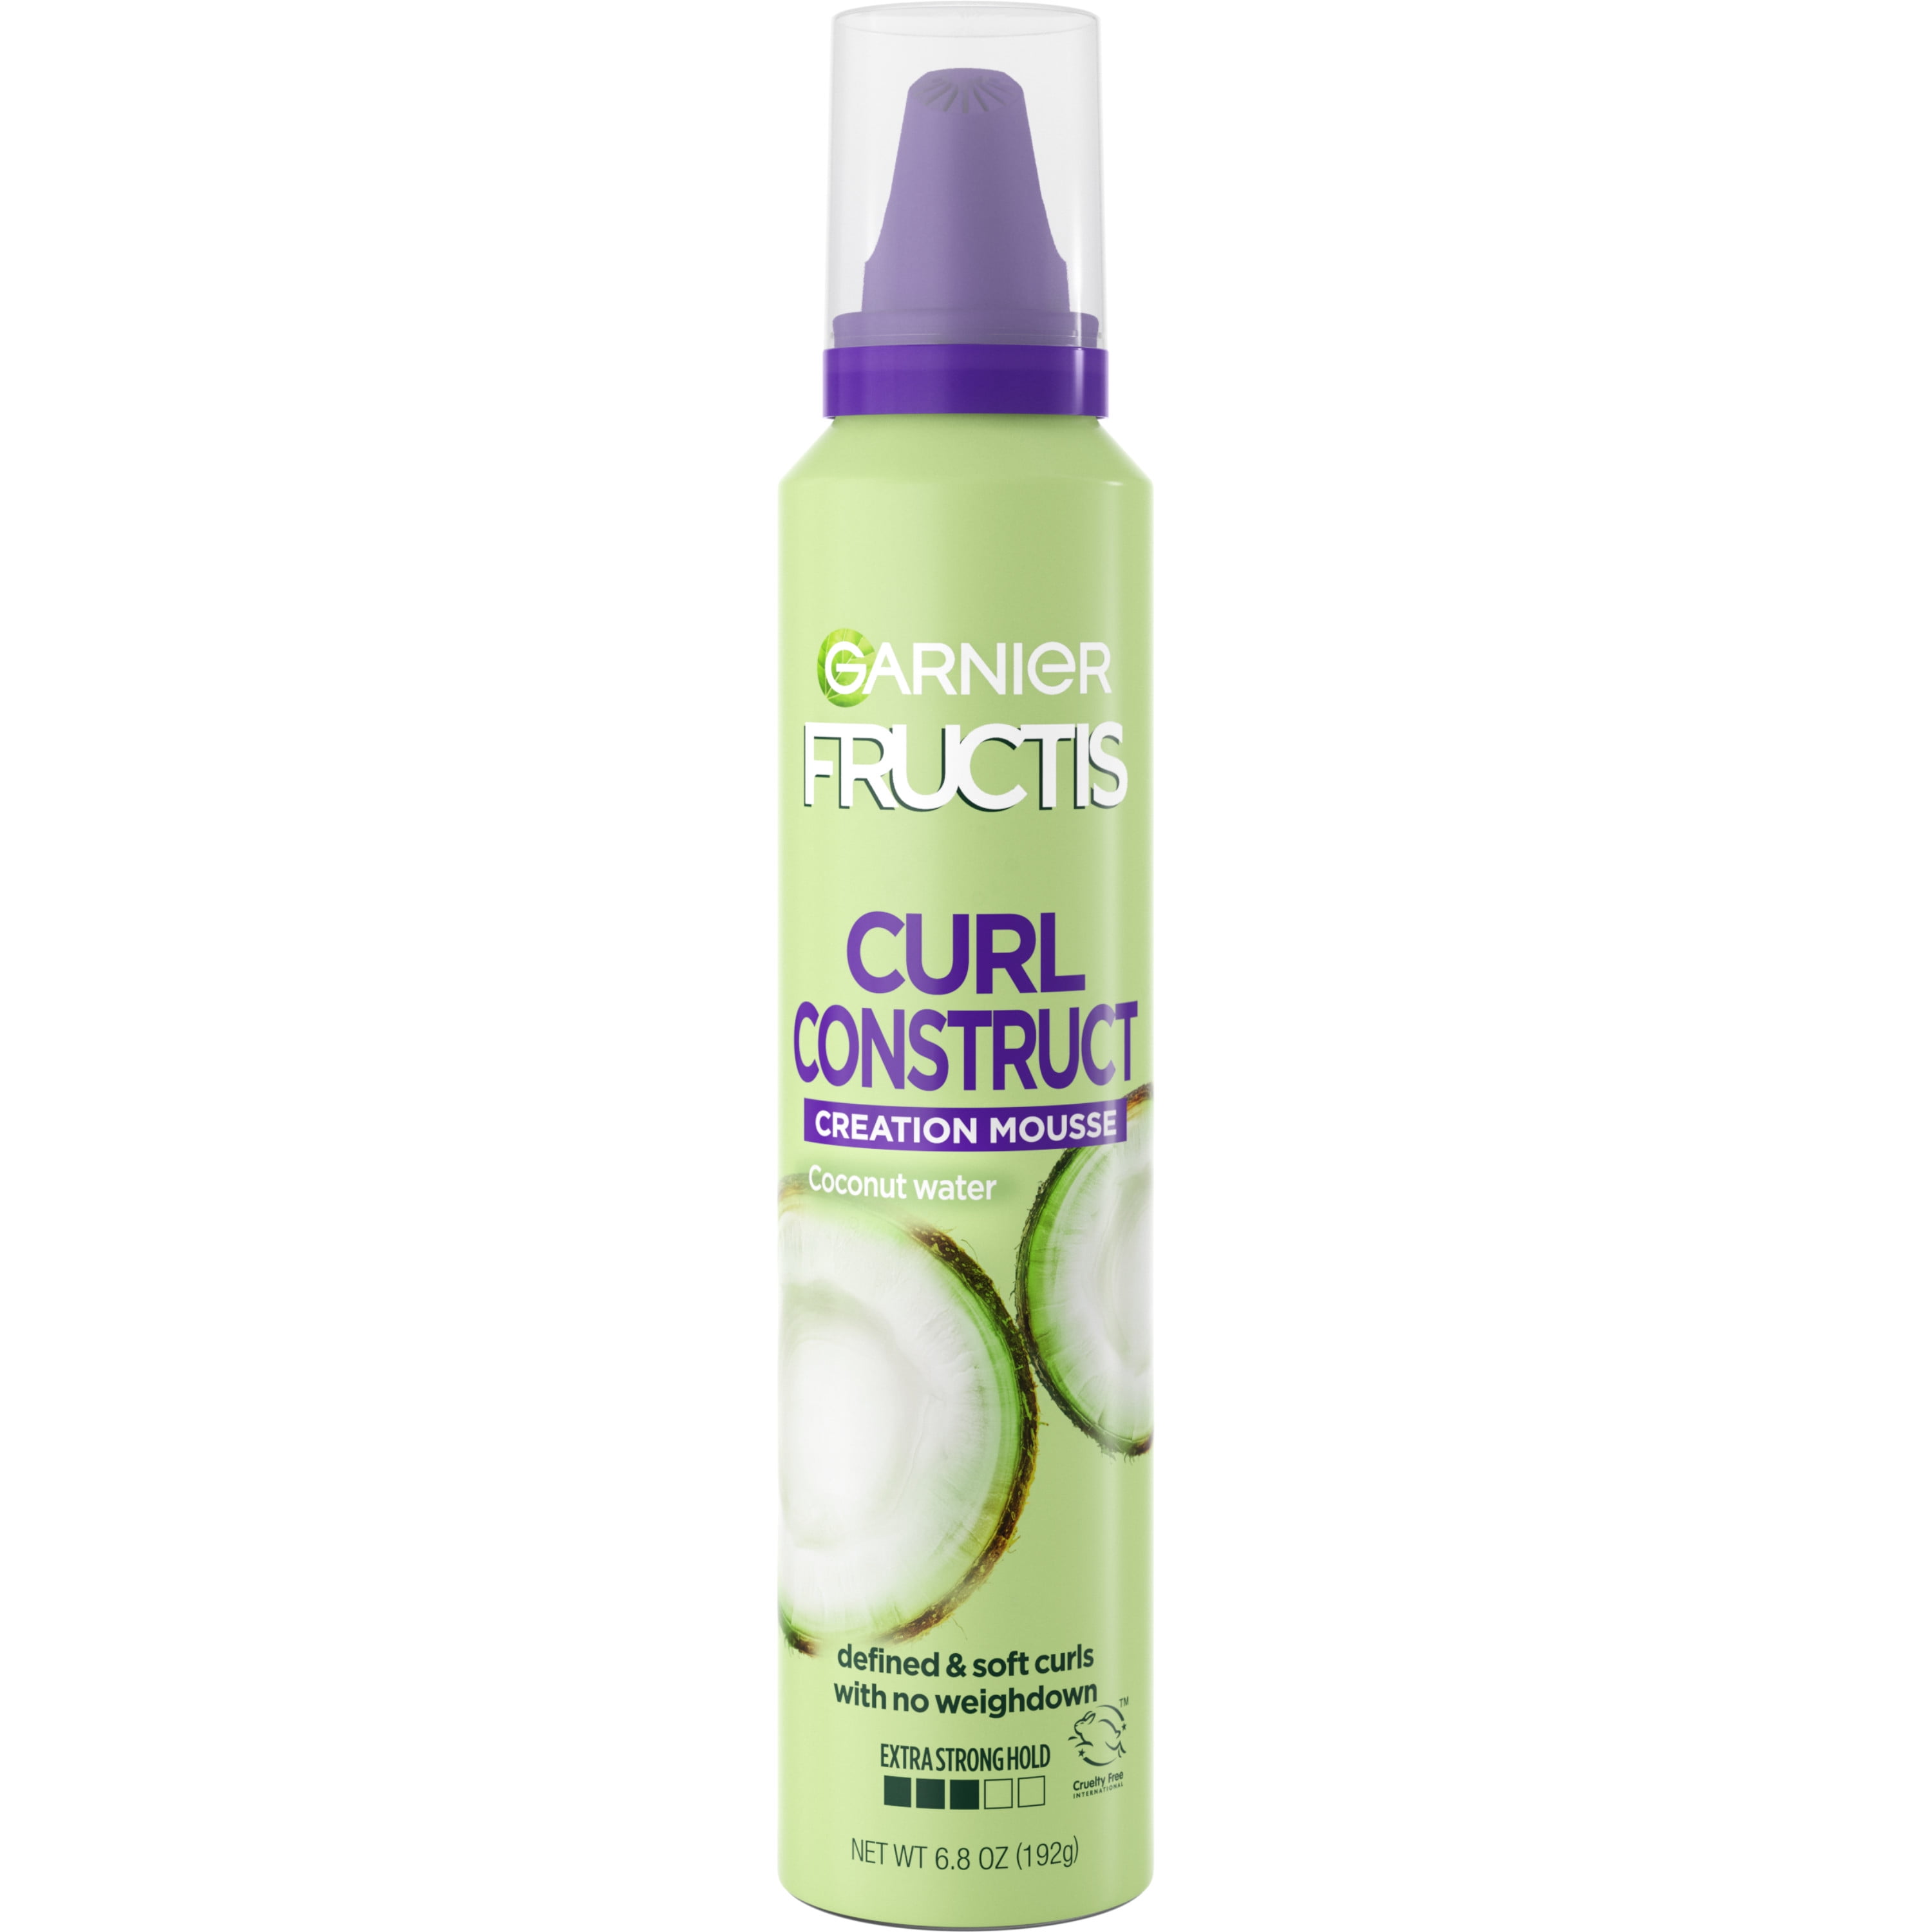 Garnier Fructis Style Curl Construct Creation Mousse, For Curly Hair, 6.8 oz